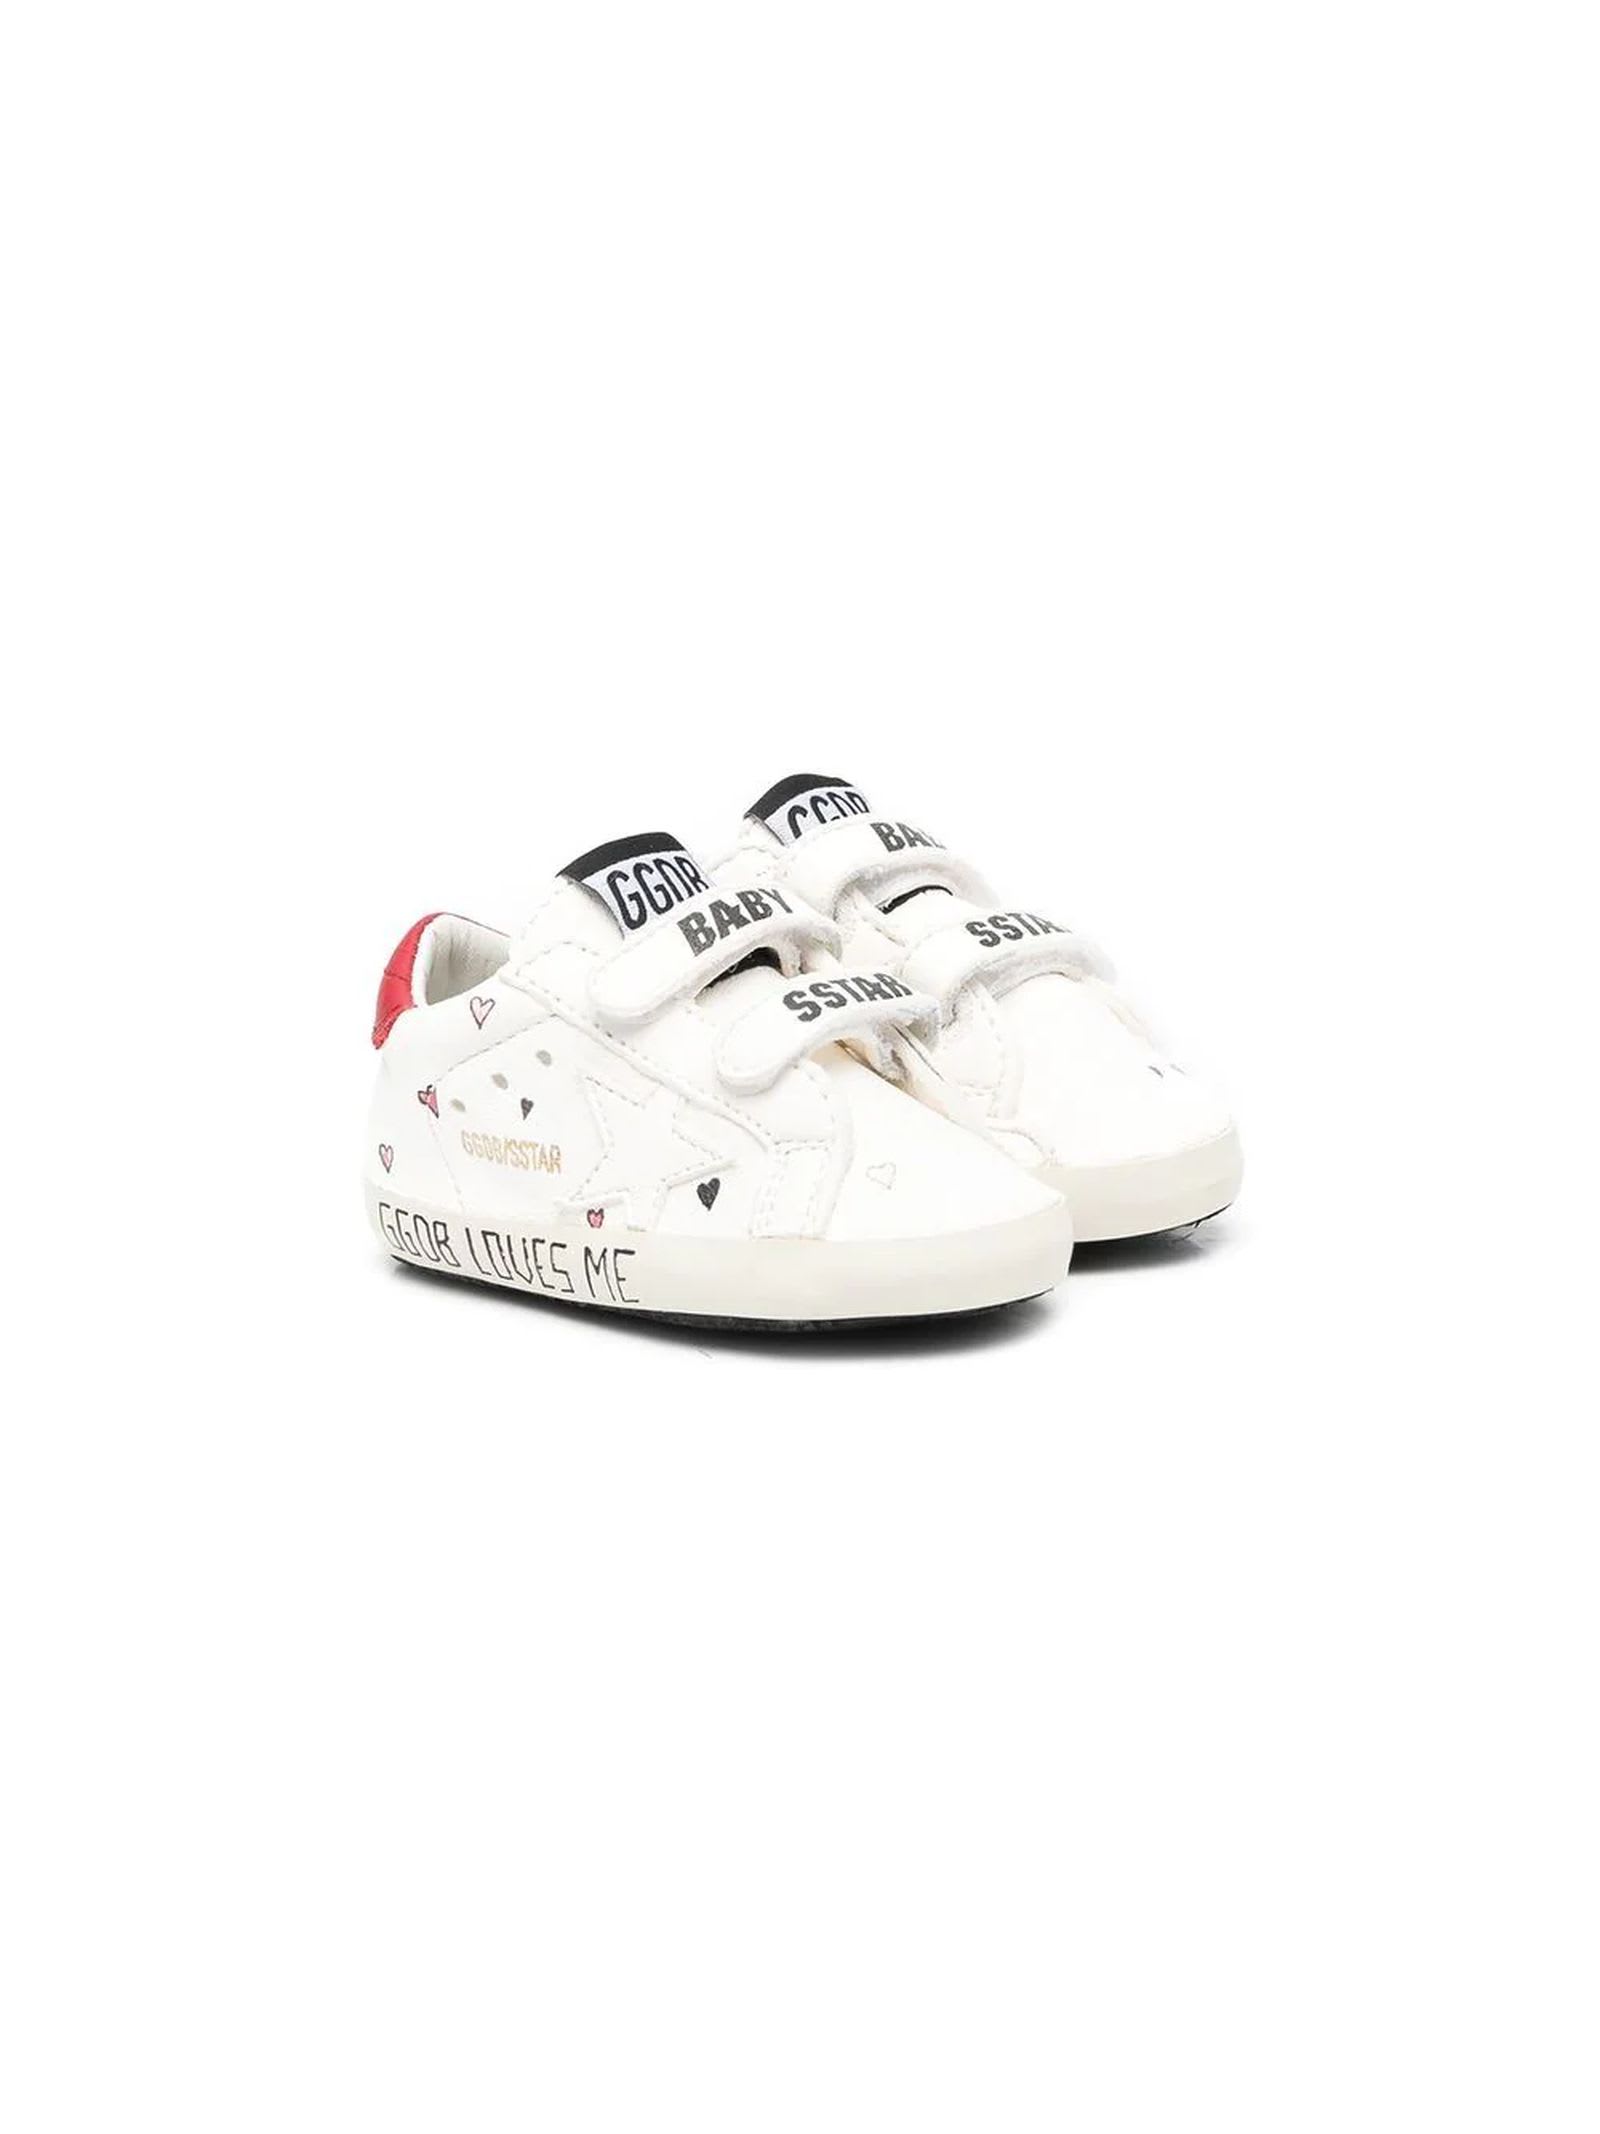 Golden Goose White Leather Nappa Sneakers